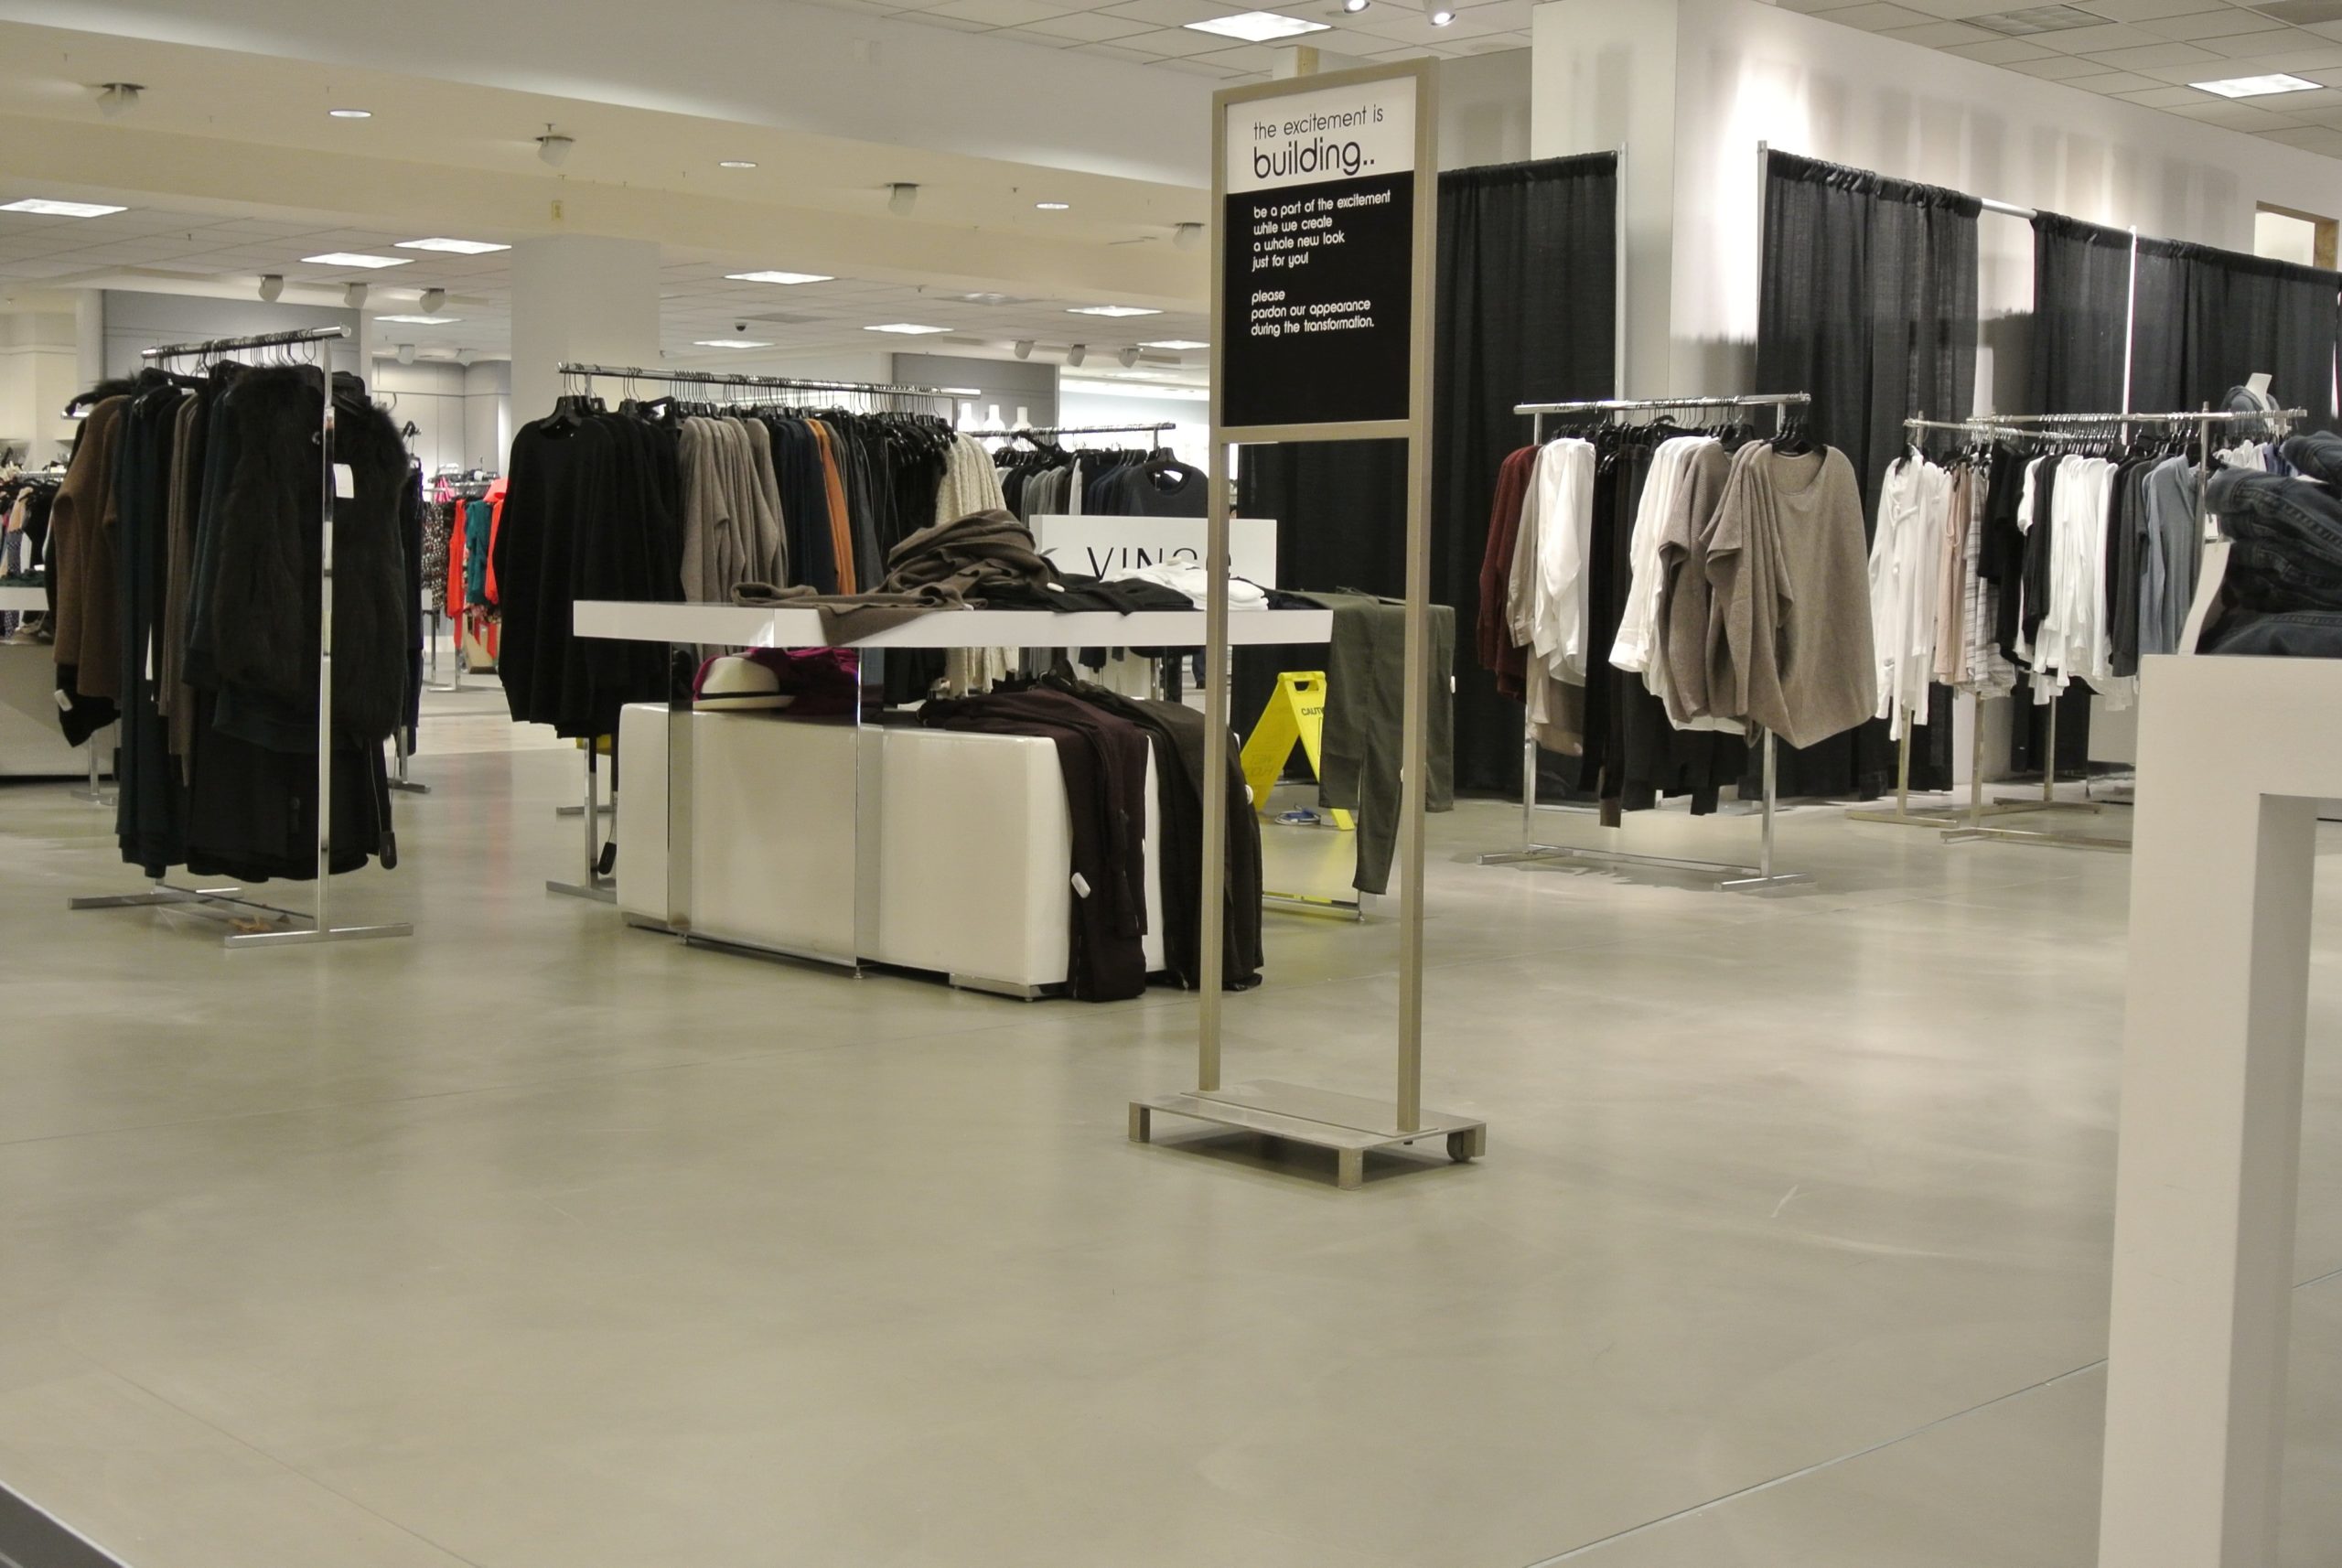 High Build Epoxy Coatings Specified in Clothing Store | Duraamen Engineered Products Inc